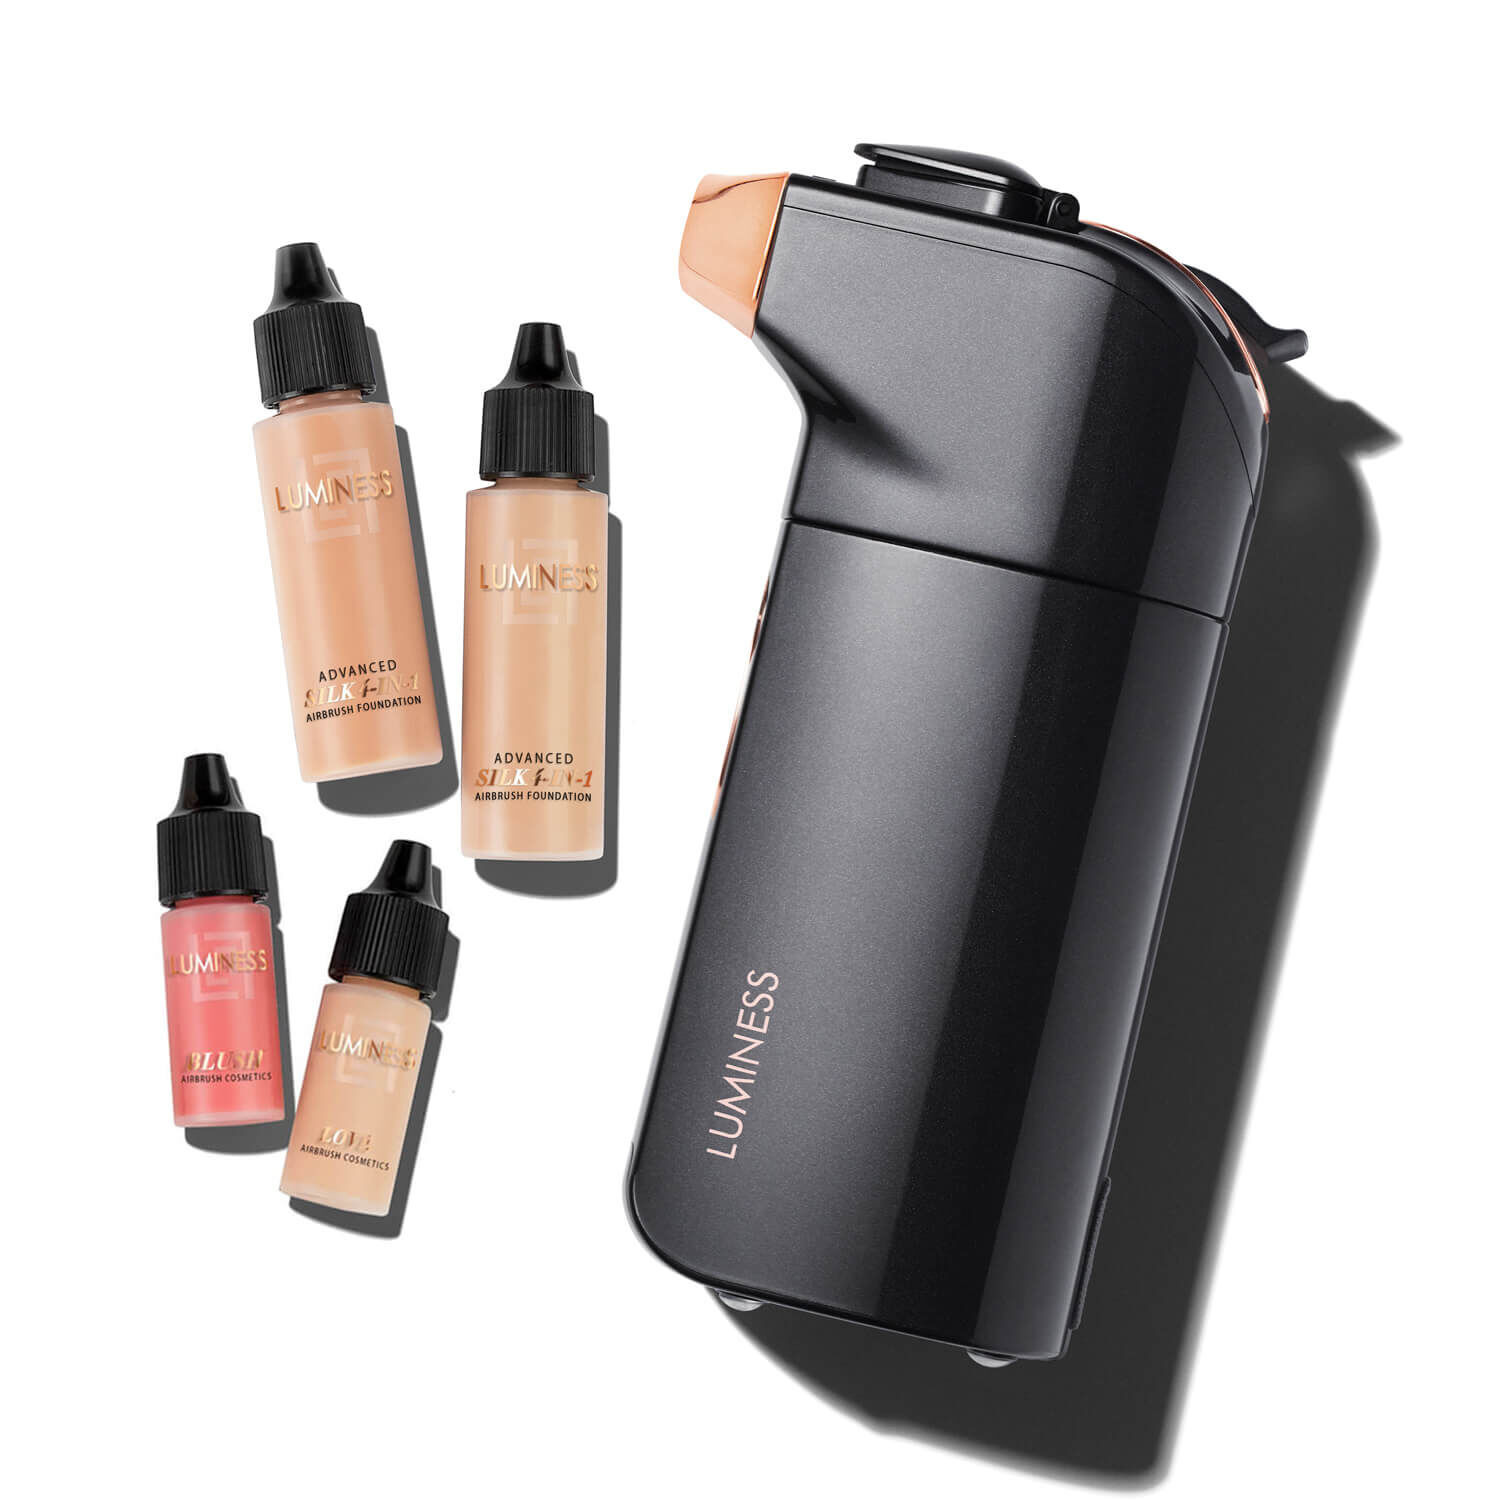 LUMINESS Breeze 2 Airbrush Makeup System - Rechargeable Airbrush Kit with  Two-Speed Setting - Cordless Spray-On Makeup Airbrush Kit - Portable Makeup